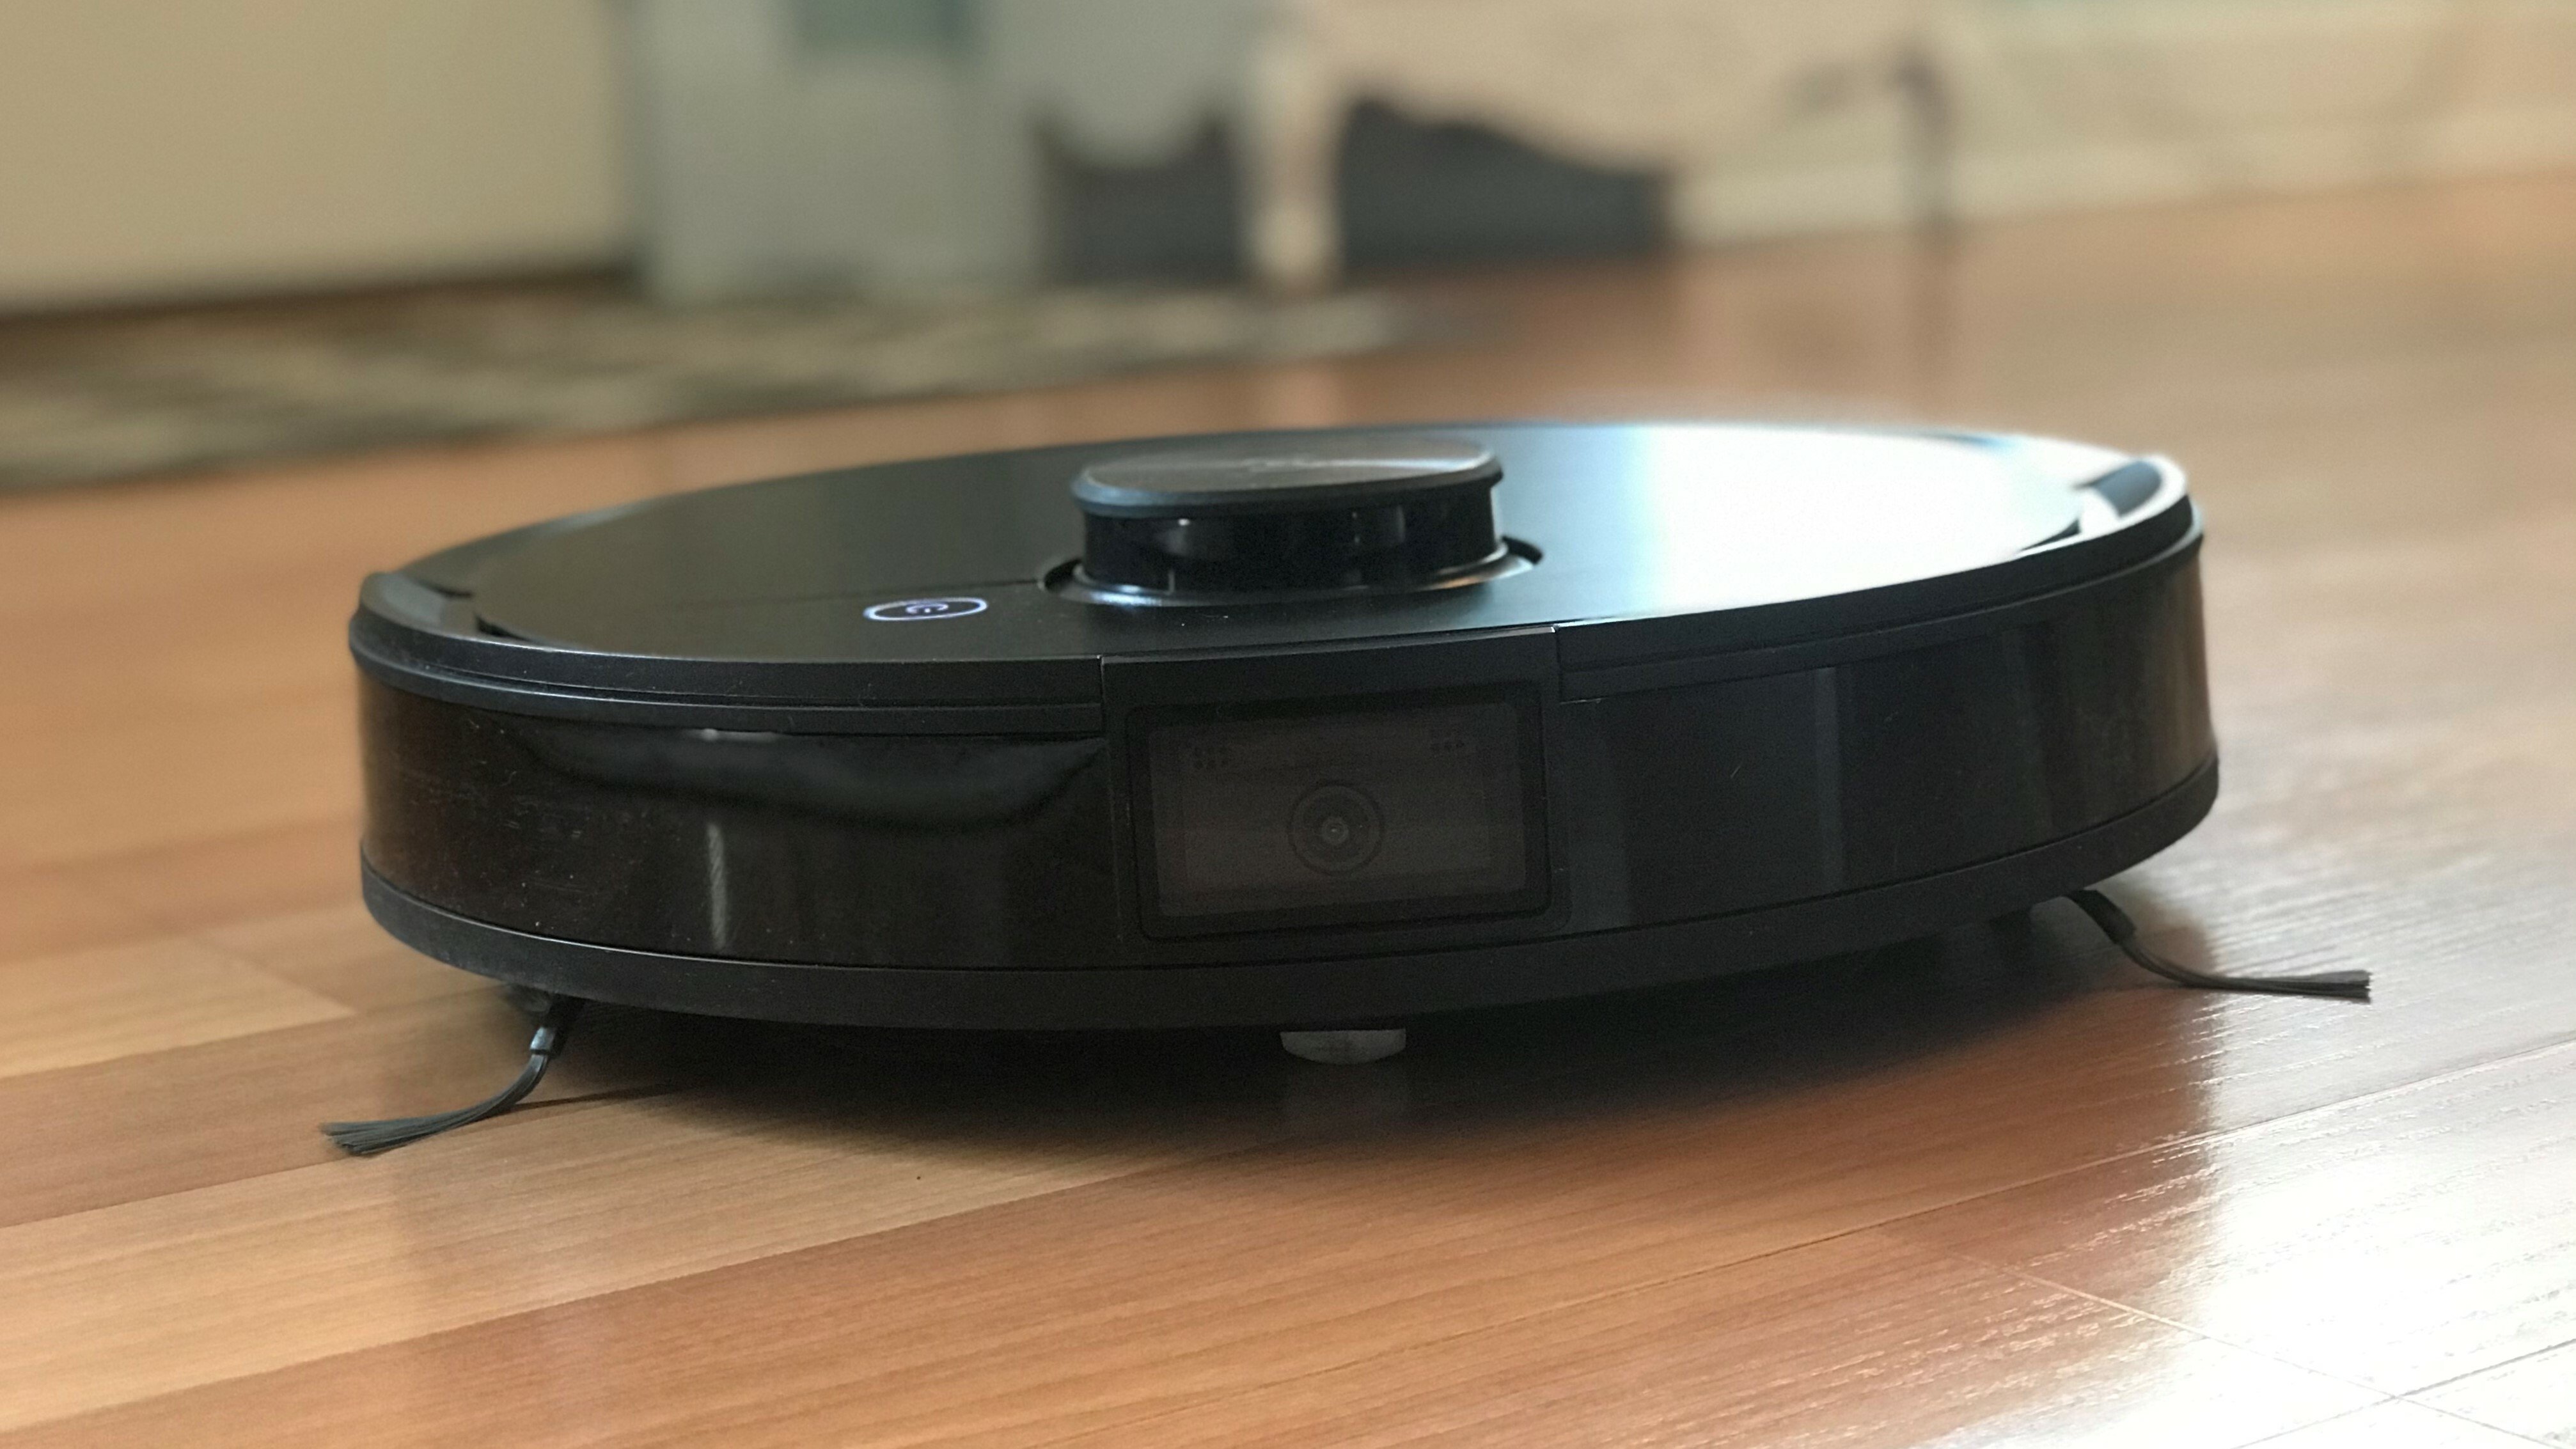 Image of a black robot vacuum cleaner